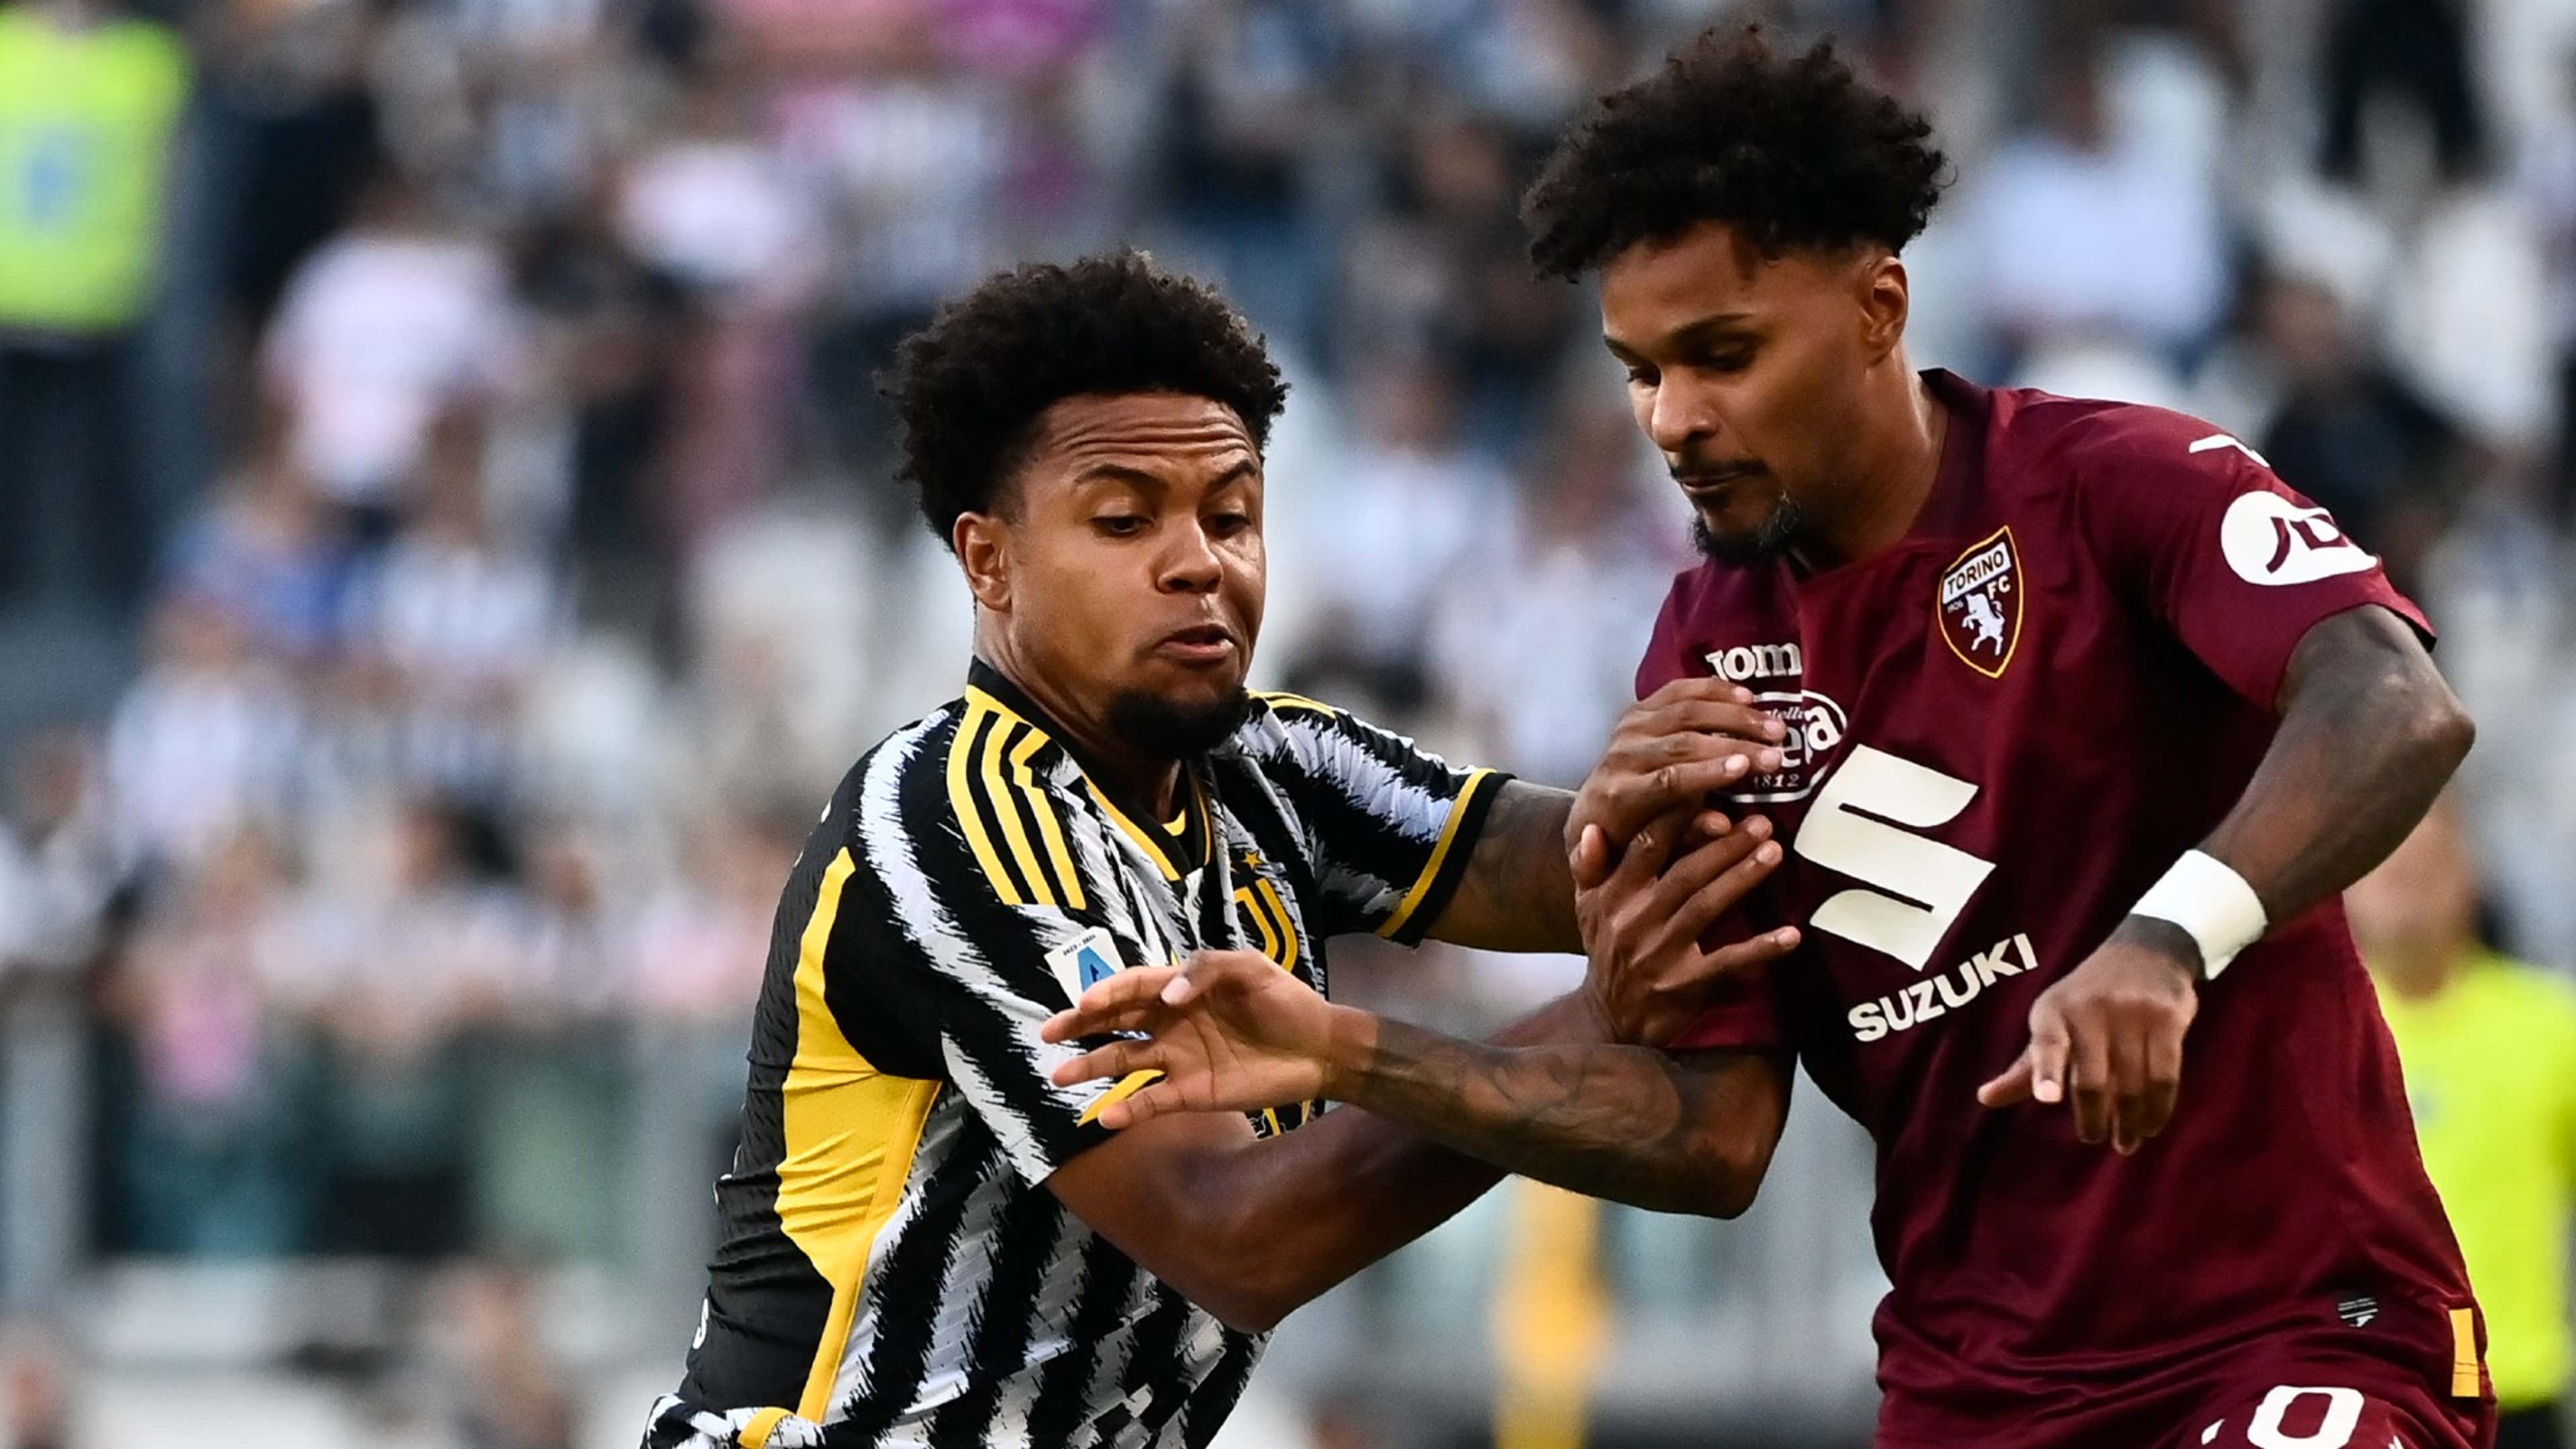 Clinical Juventus go third after derby win against Torino